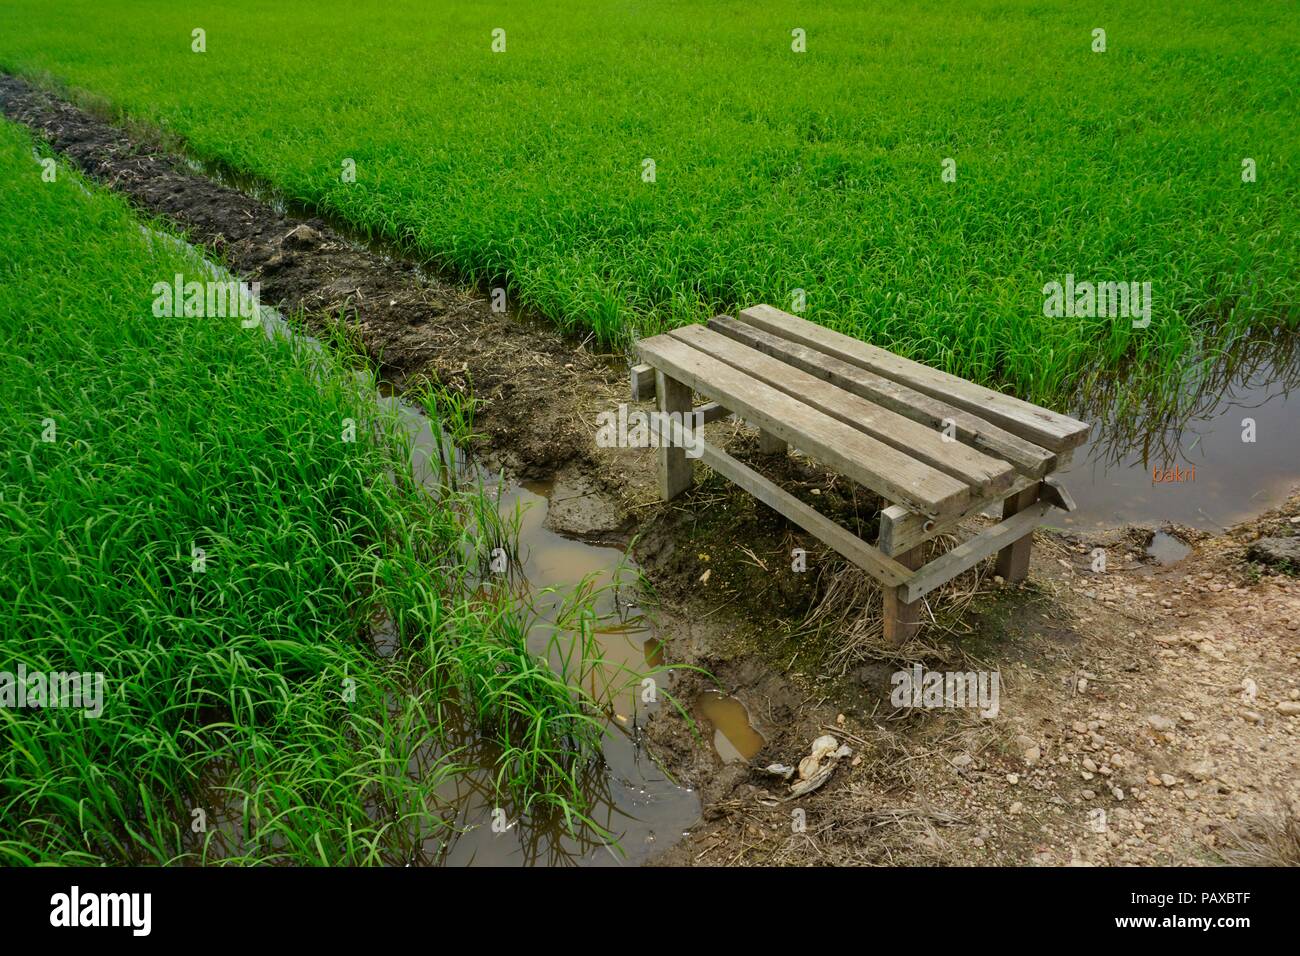 the chair at paddyfield Stock Photo